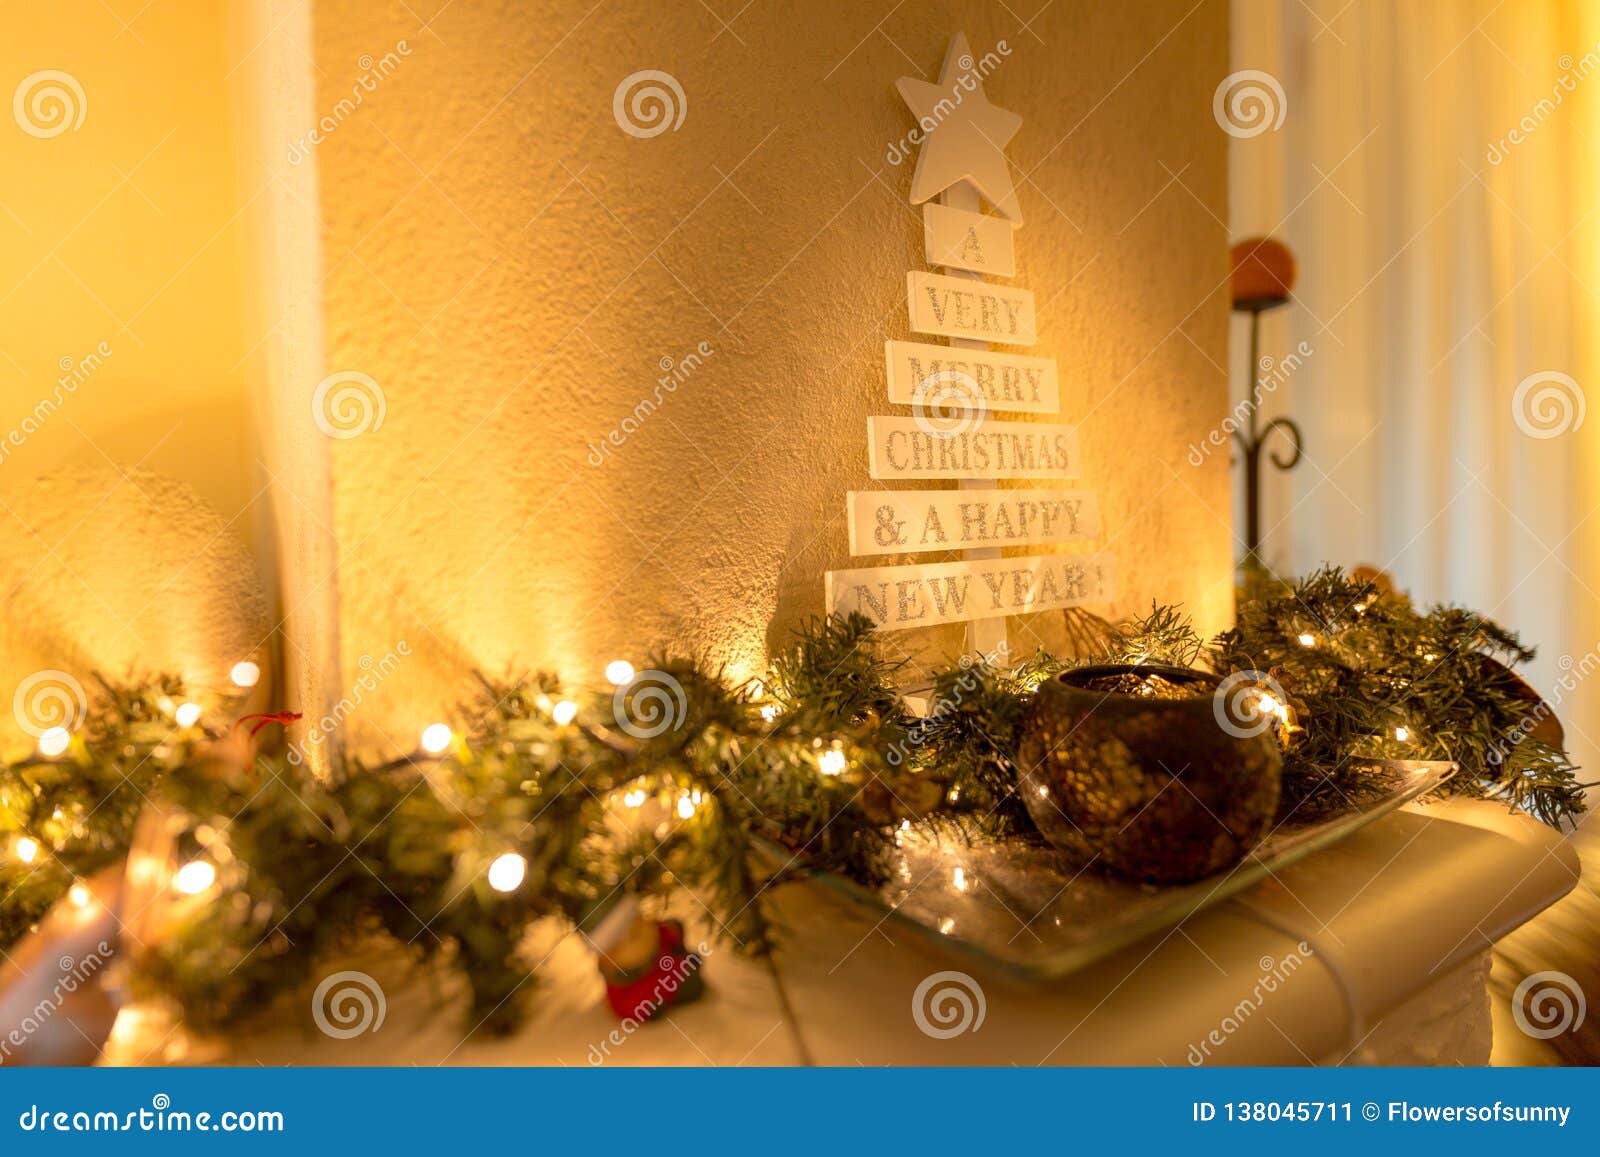 Christmas Decoration Background with Candle Light and Ornaments Stock ...